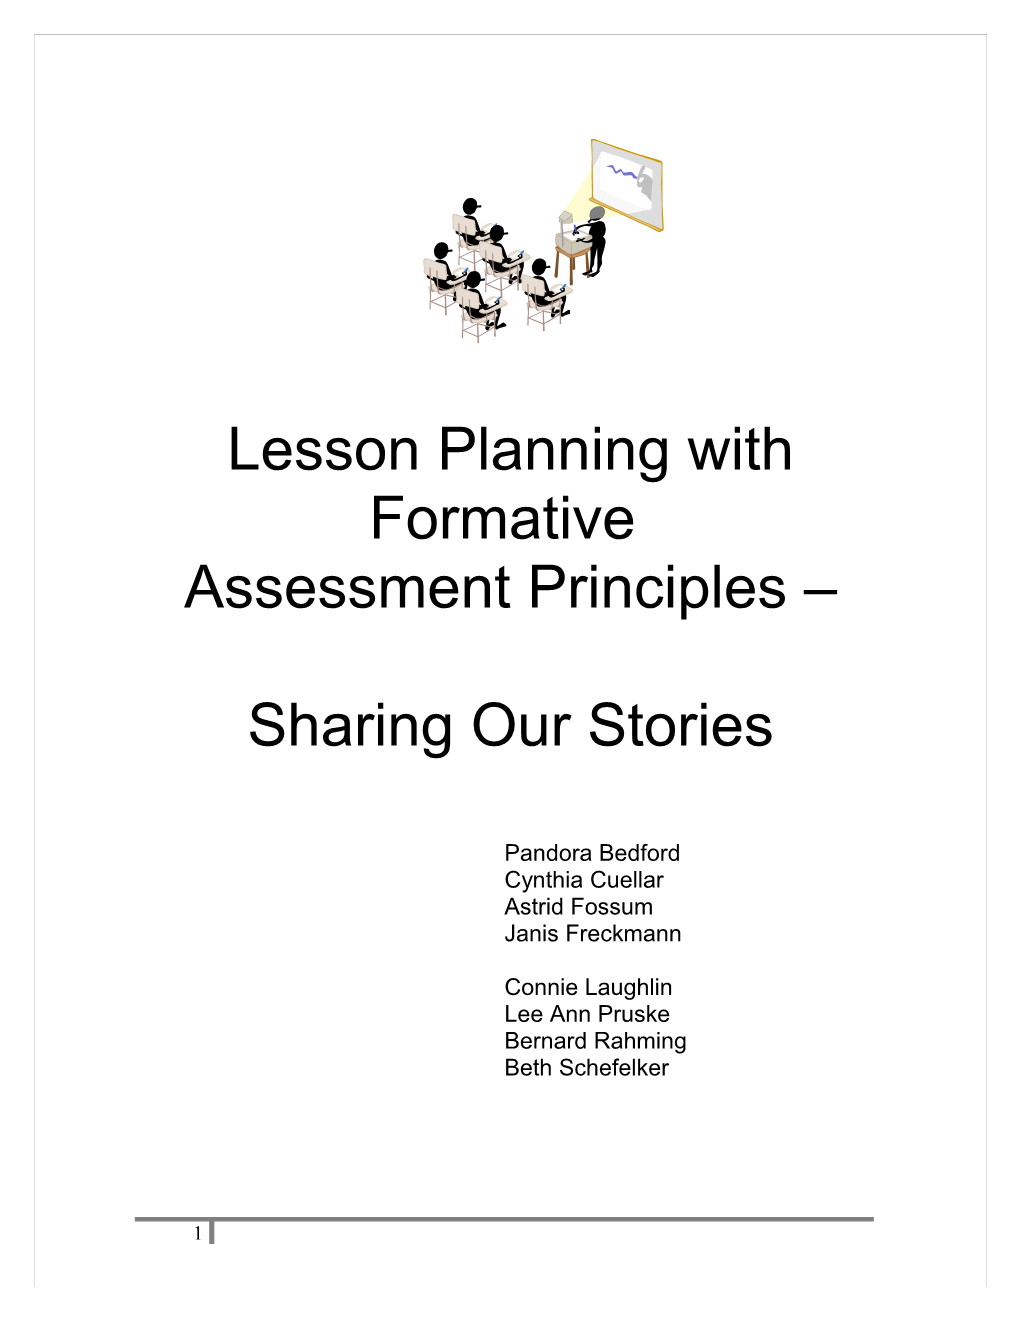 Lesson Planning with Formative Assessment Principles